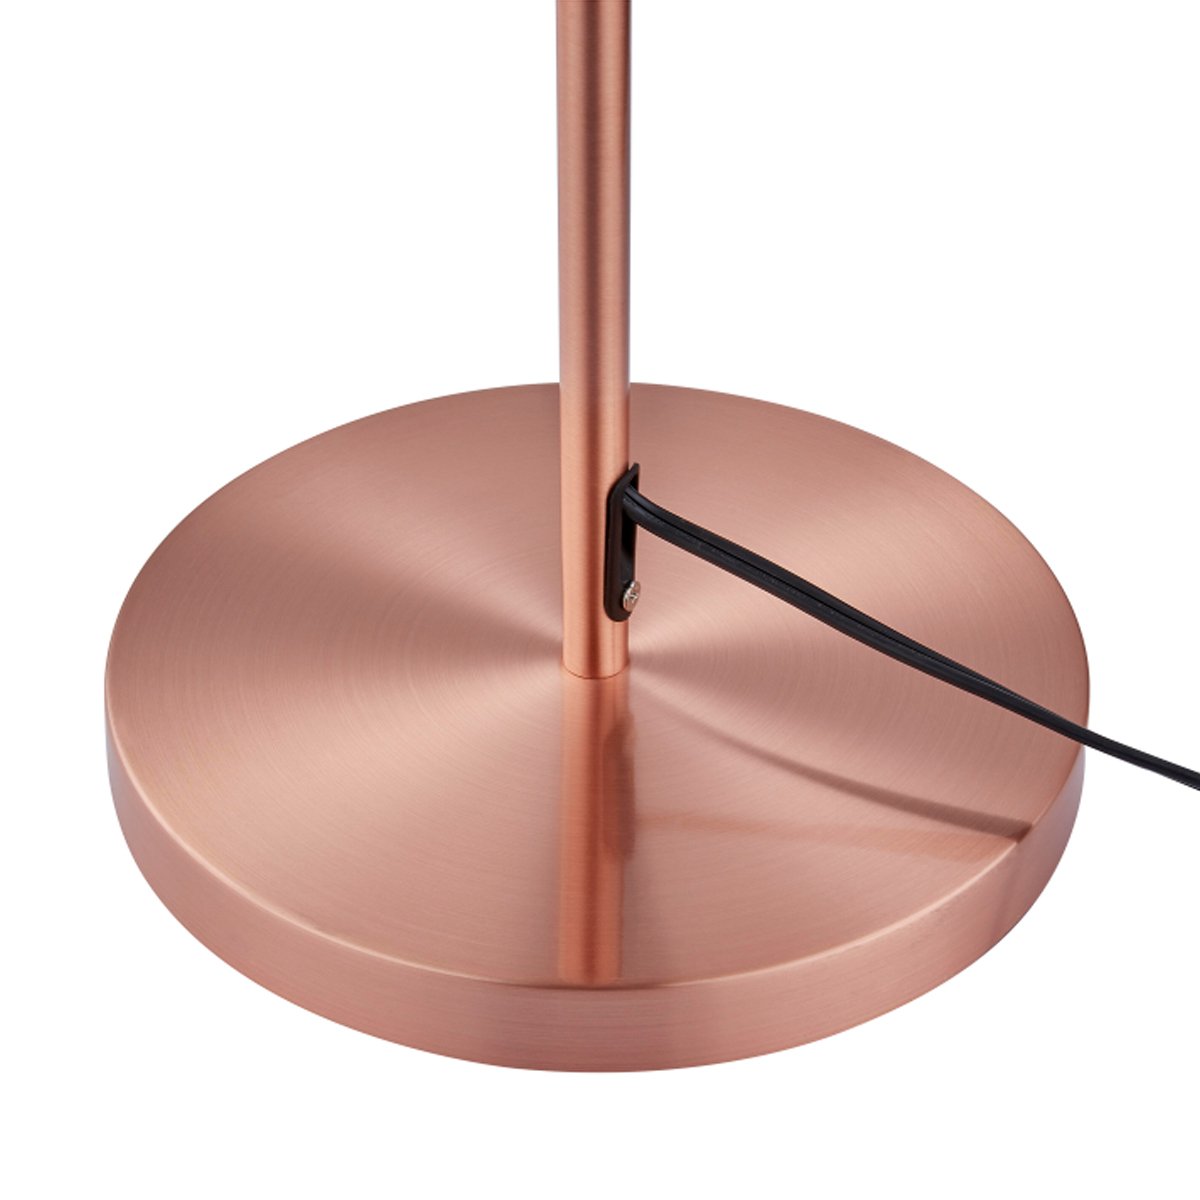 Our Caitlin floor lamp features an angular metal frame to bring a hint of industrial style to your interior. Add a filament bulb for an extra special effect. Finished in brushed copper.